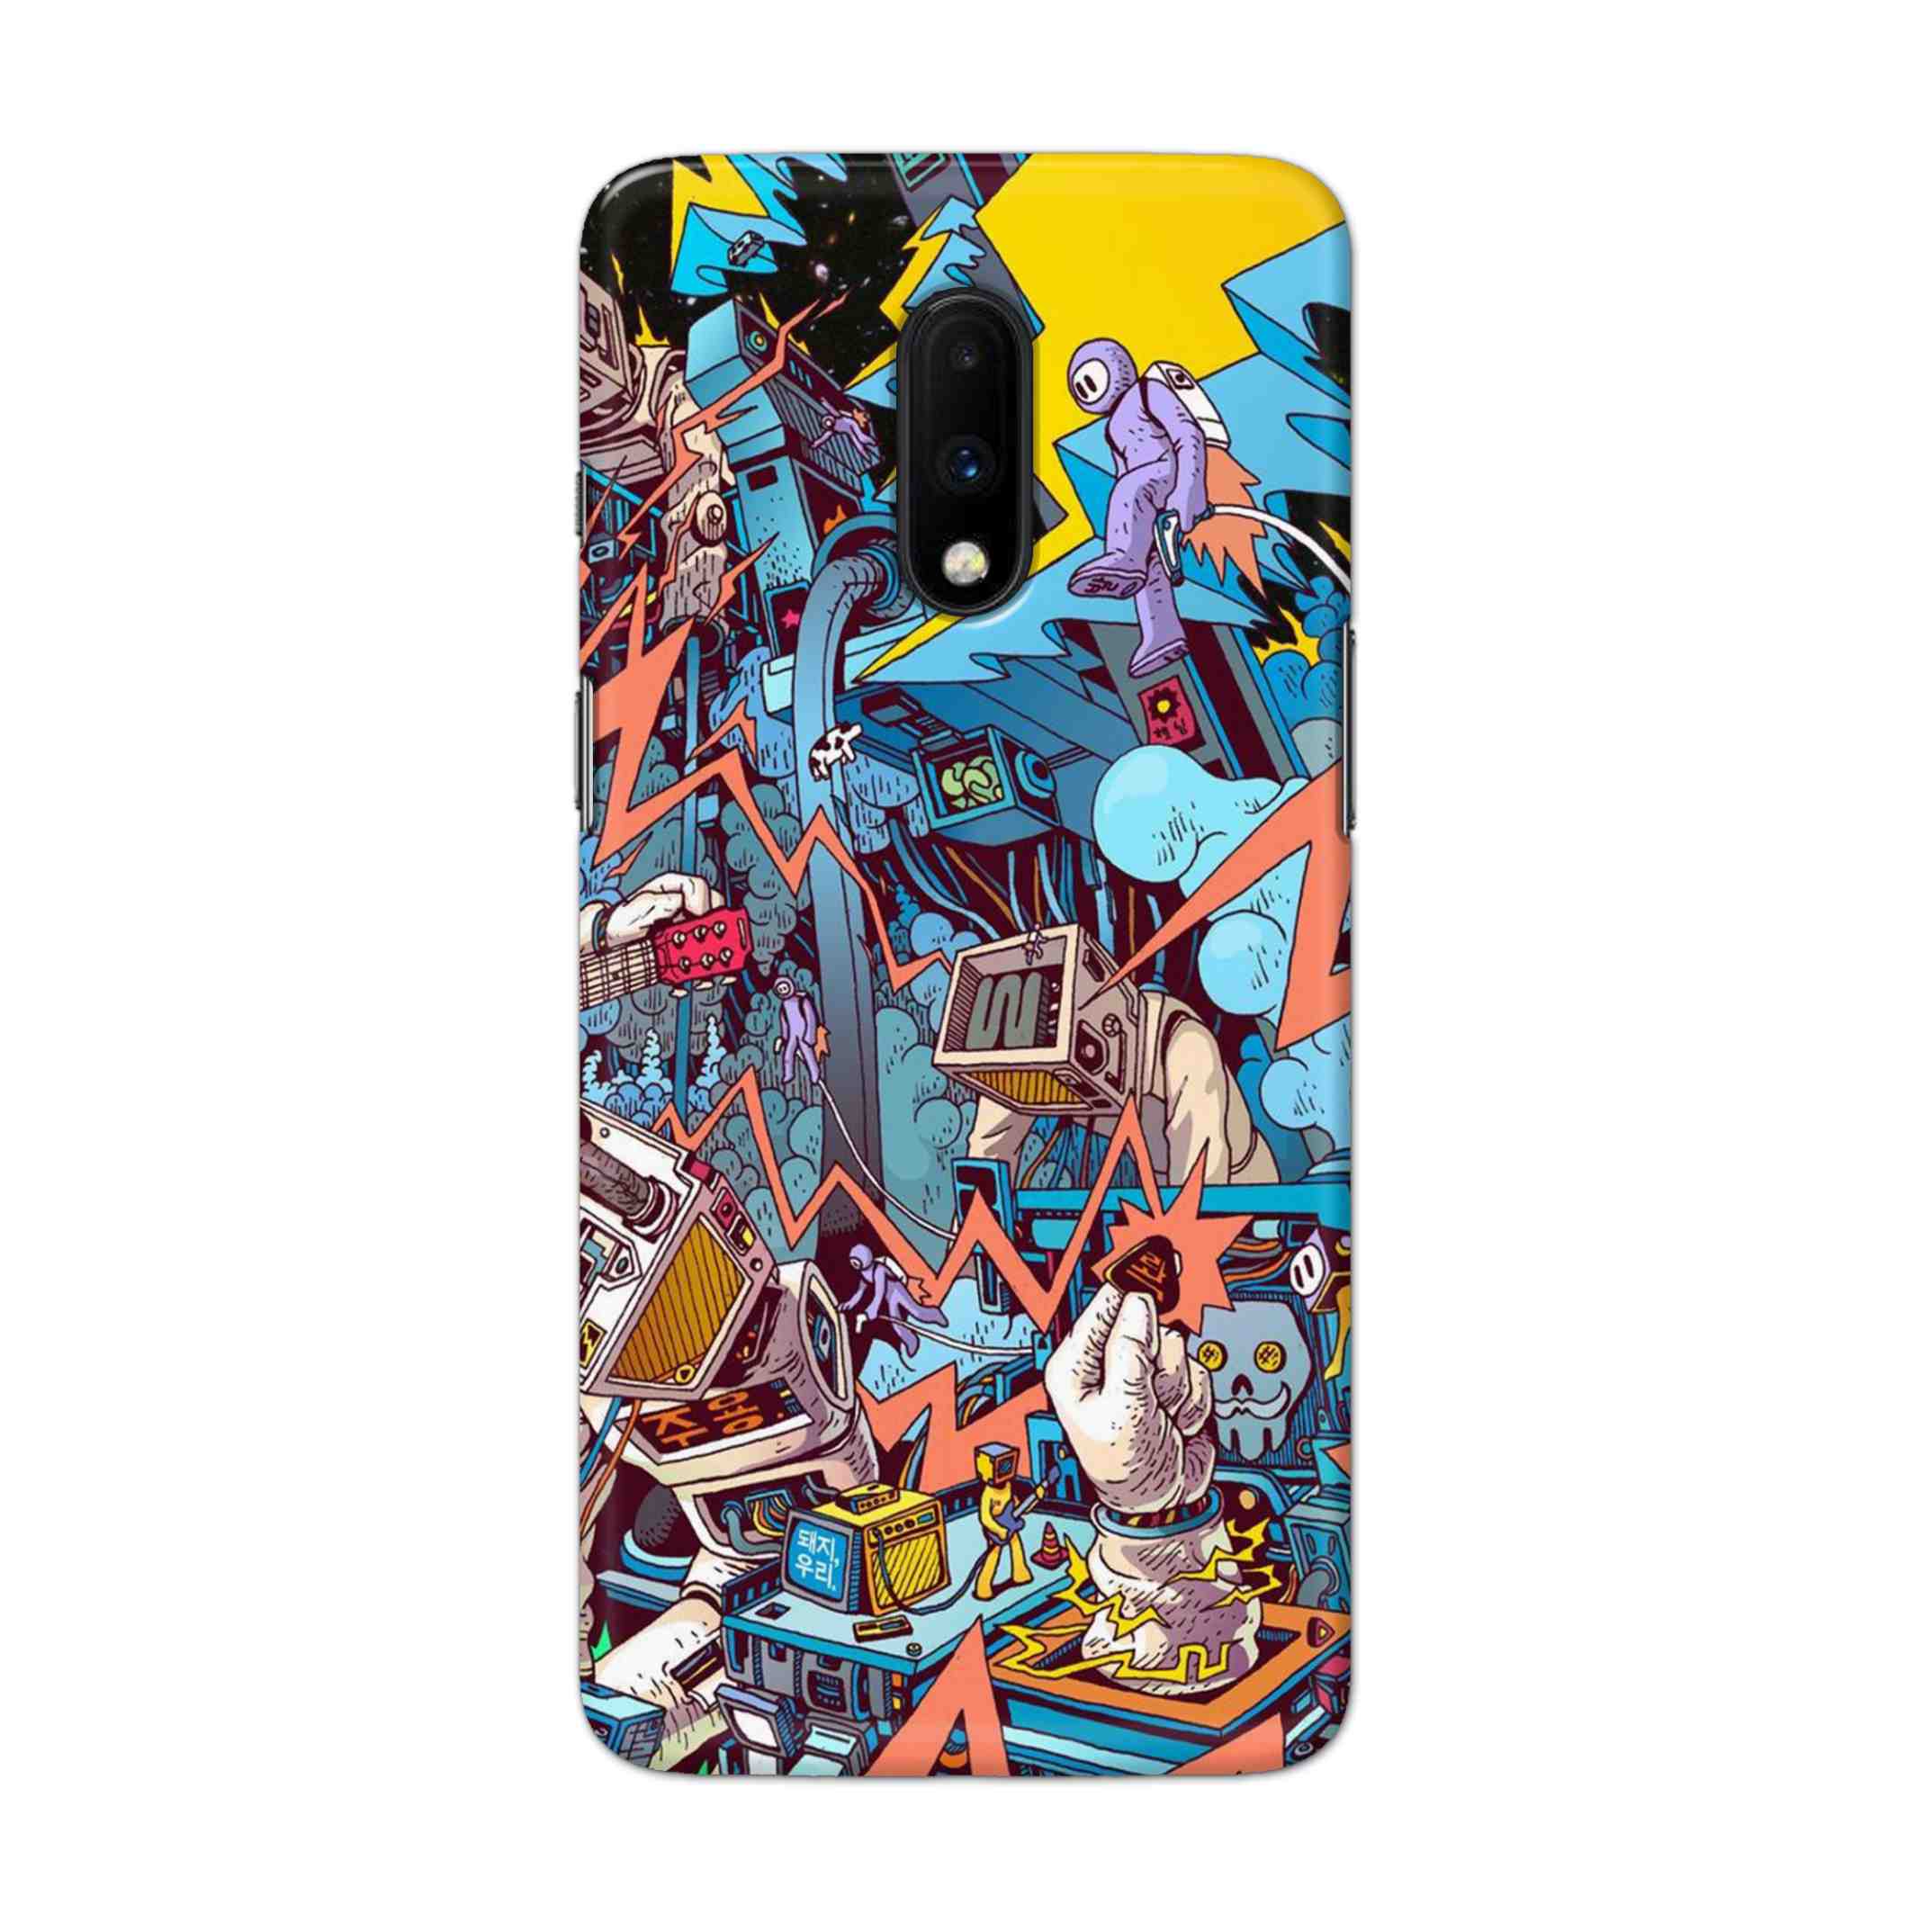 Buy Ofo Panic Hard Back Mobile Phone Case Cover For OnePlus 7 Online